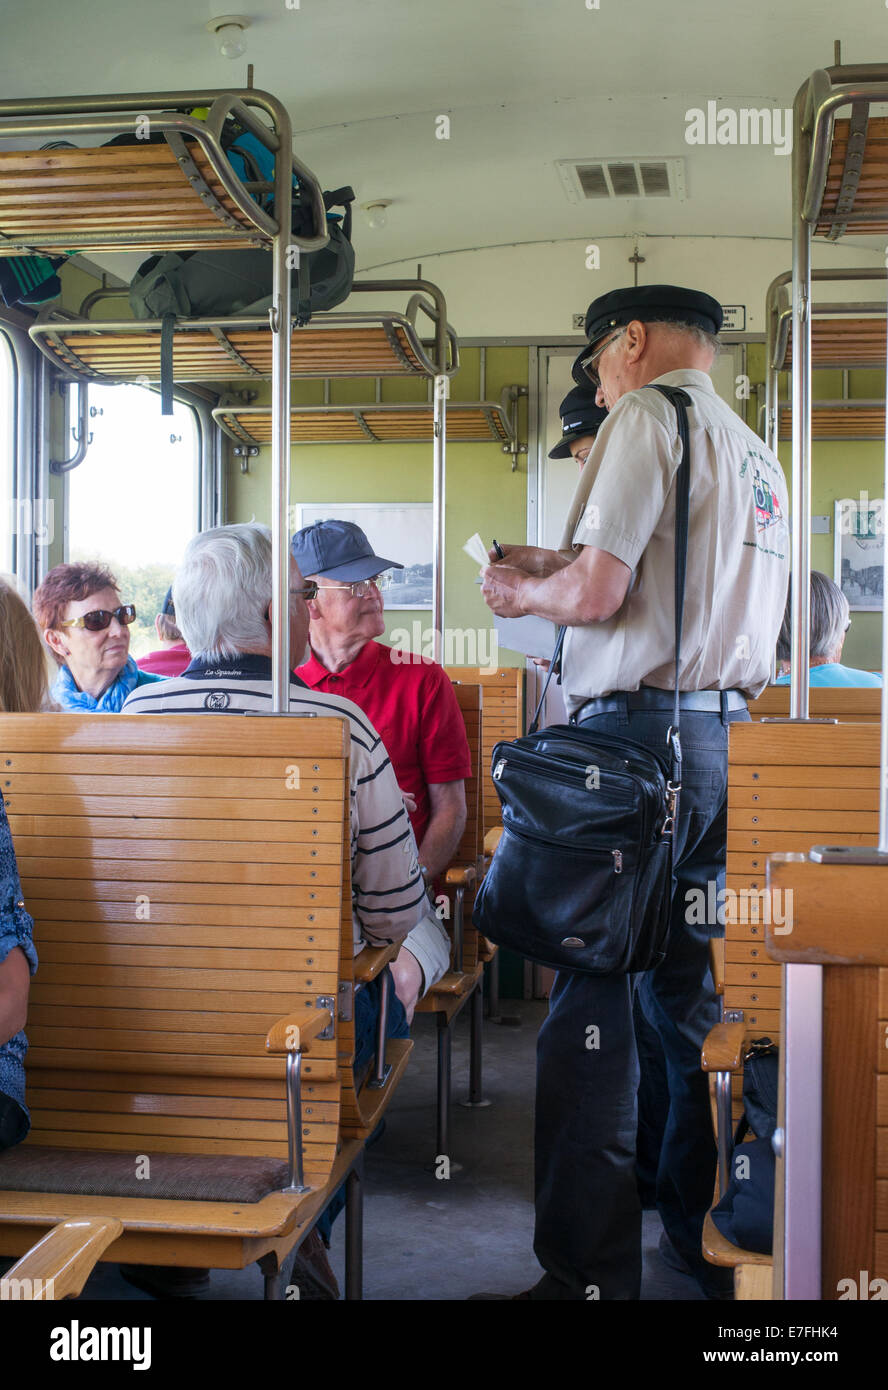 Conductor on the Chemin de Fer de la Baie de Somme inspects passengers' tickets within a train, France, Europe. Stock Photo